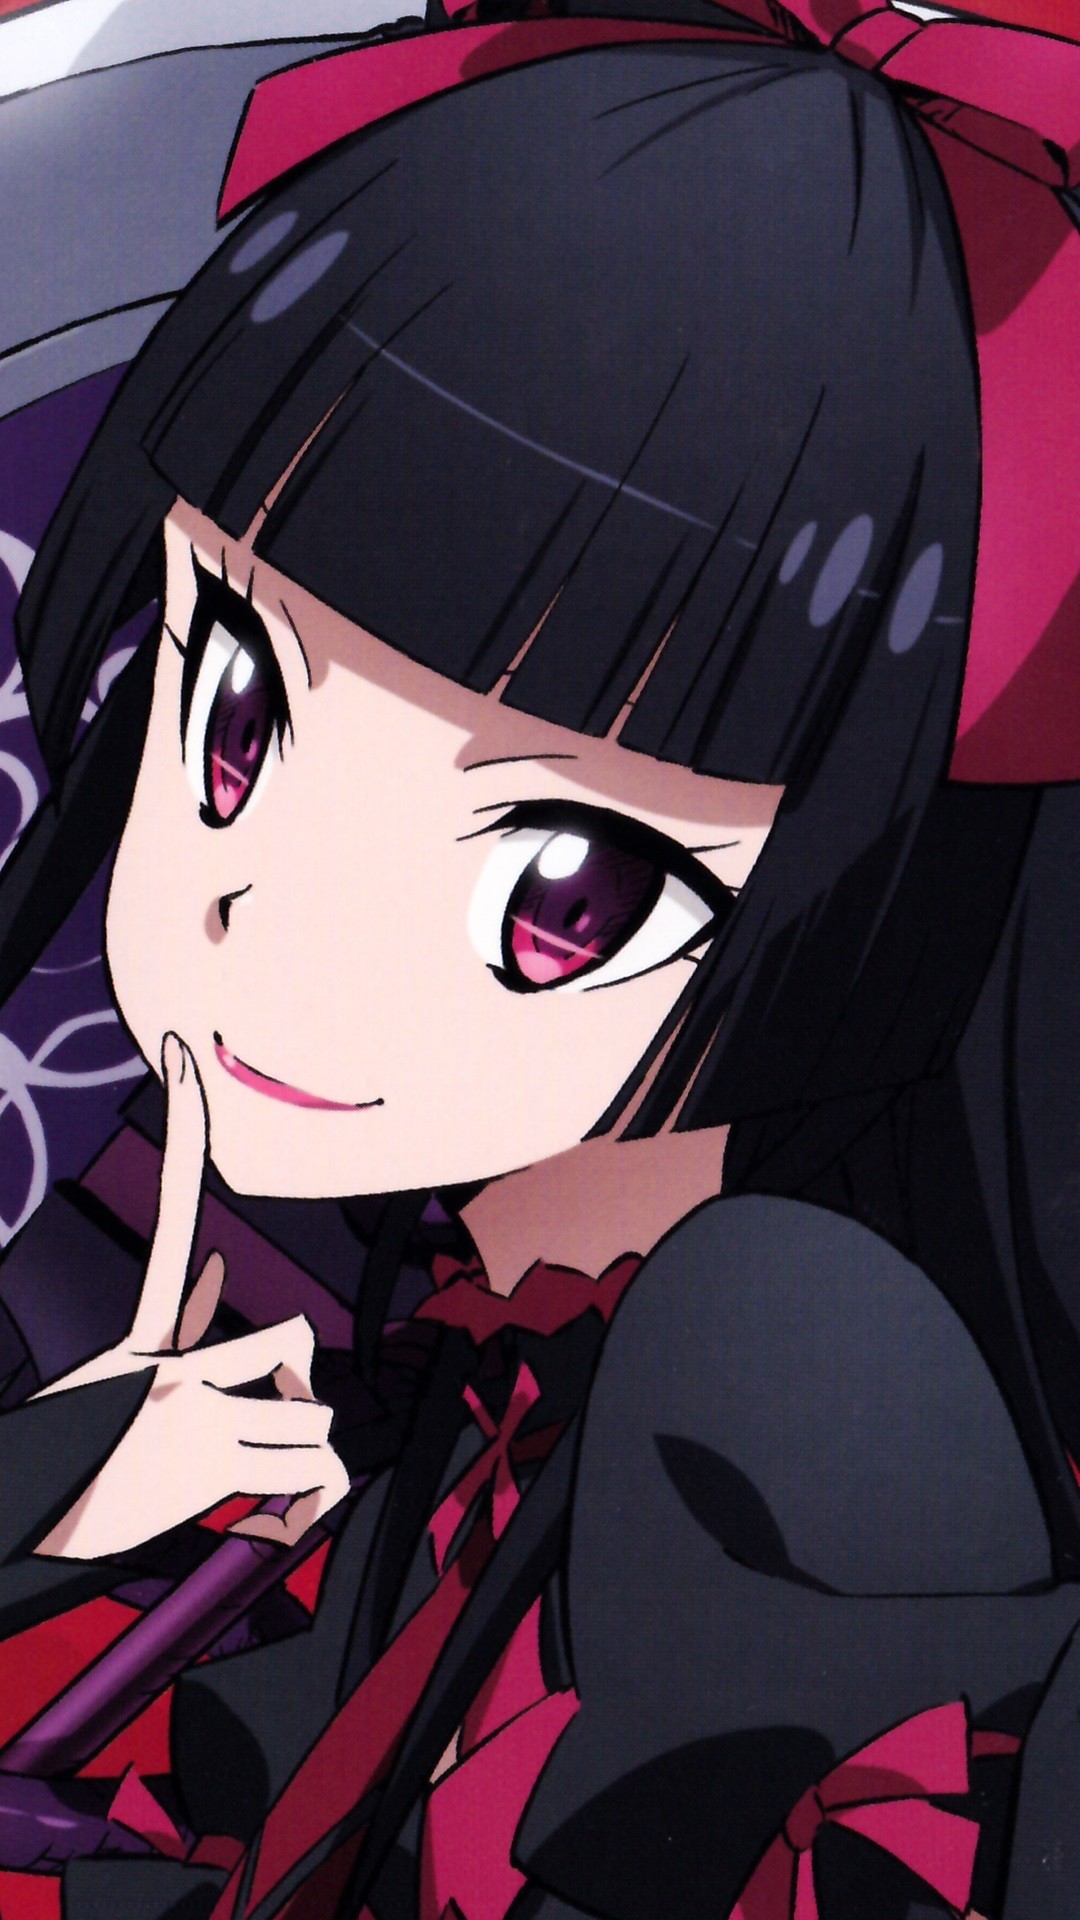 Rory Mercury Wallpaper Download Free Stunning Backgrounds For Desktop Computers And Smartphones In Any Resolution Desktop Android Iphone Ipad 1920x1080 320x480 1680x1050 1280x900 Etc Wallpapertag